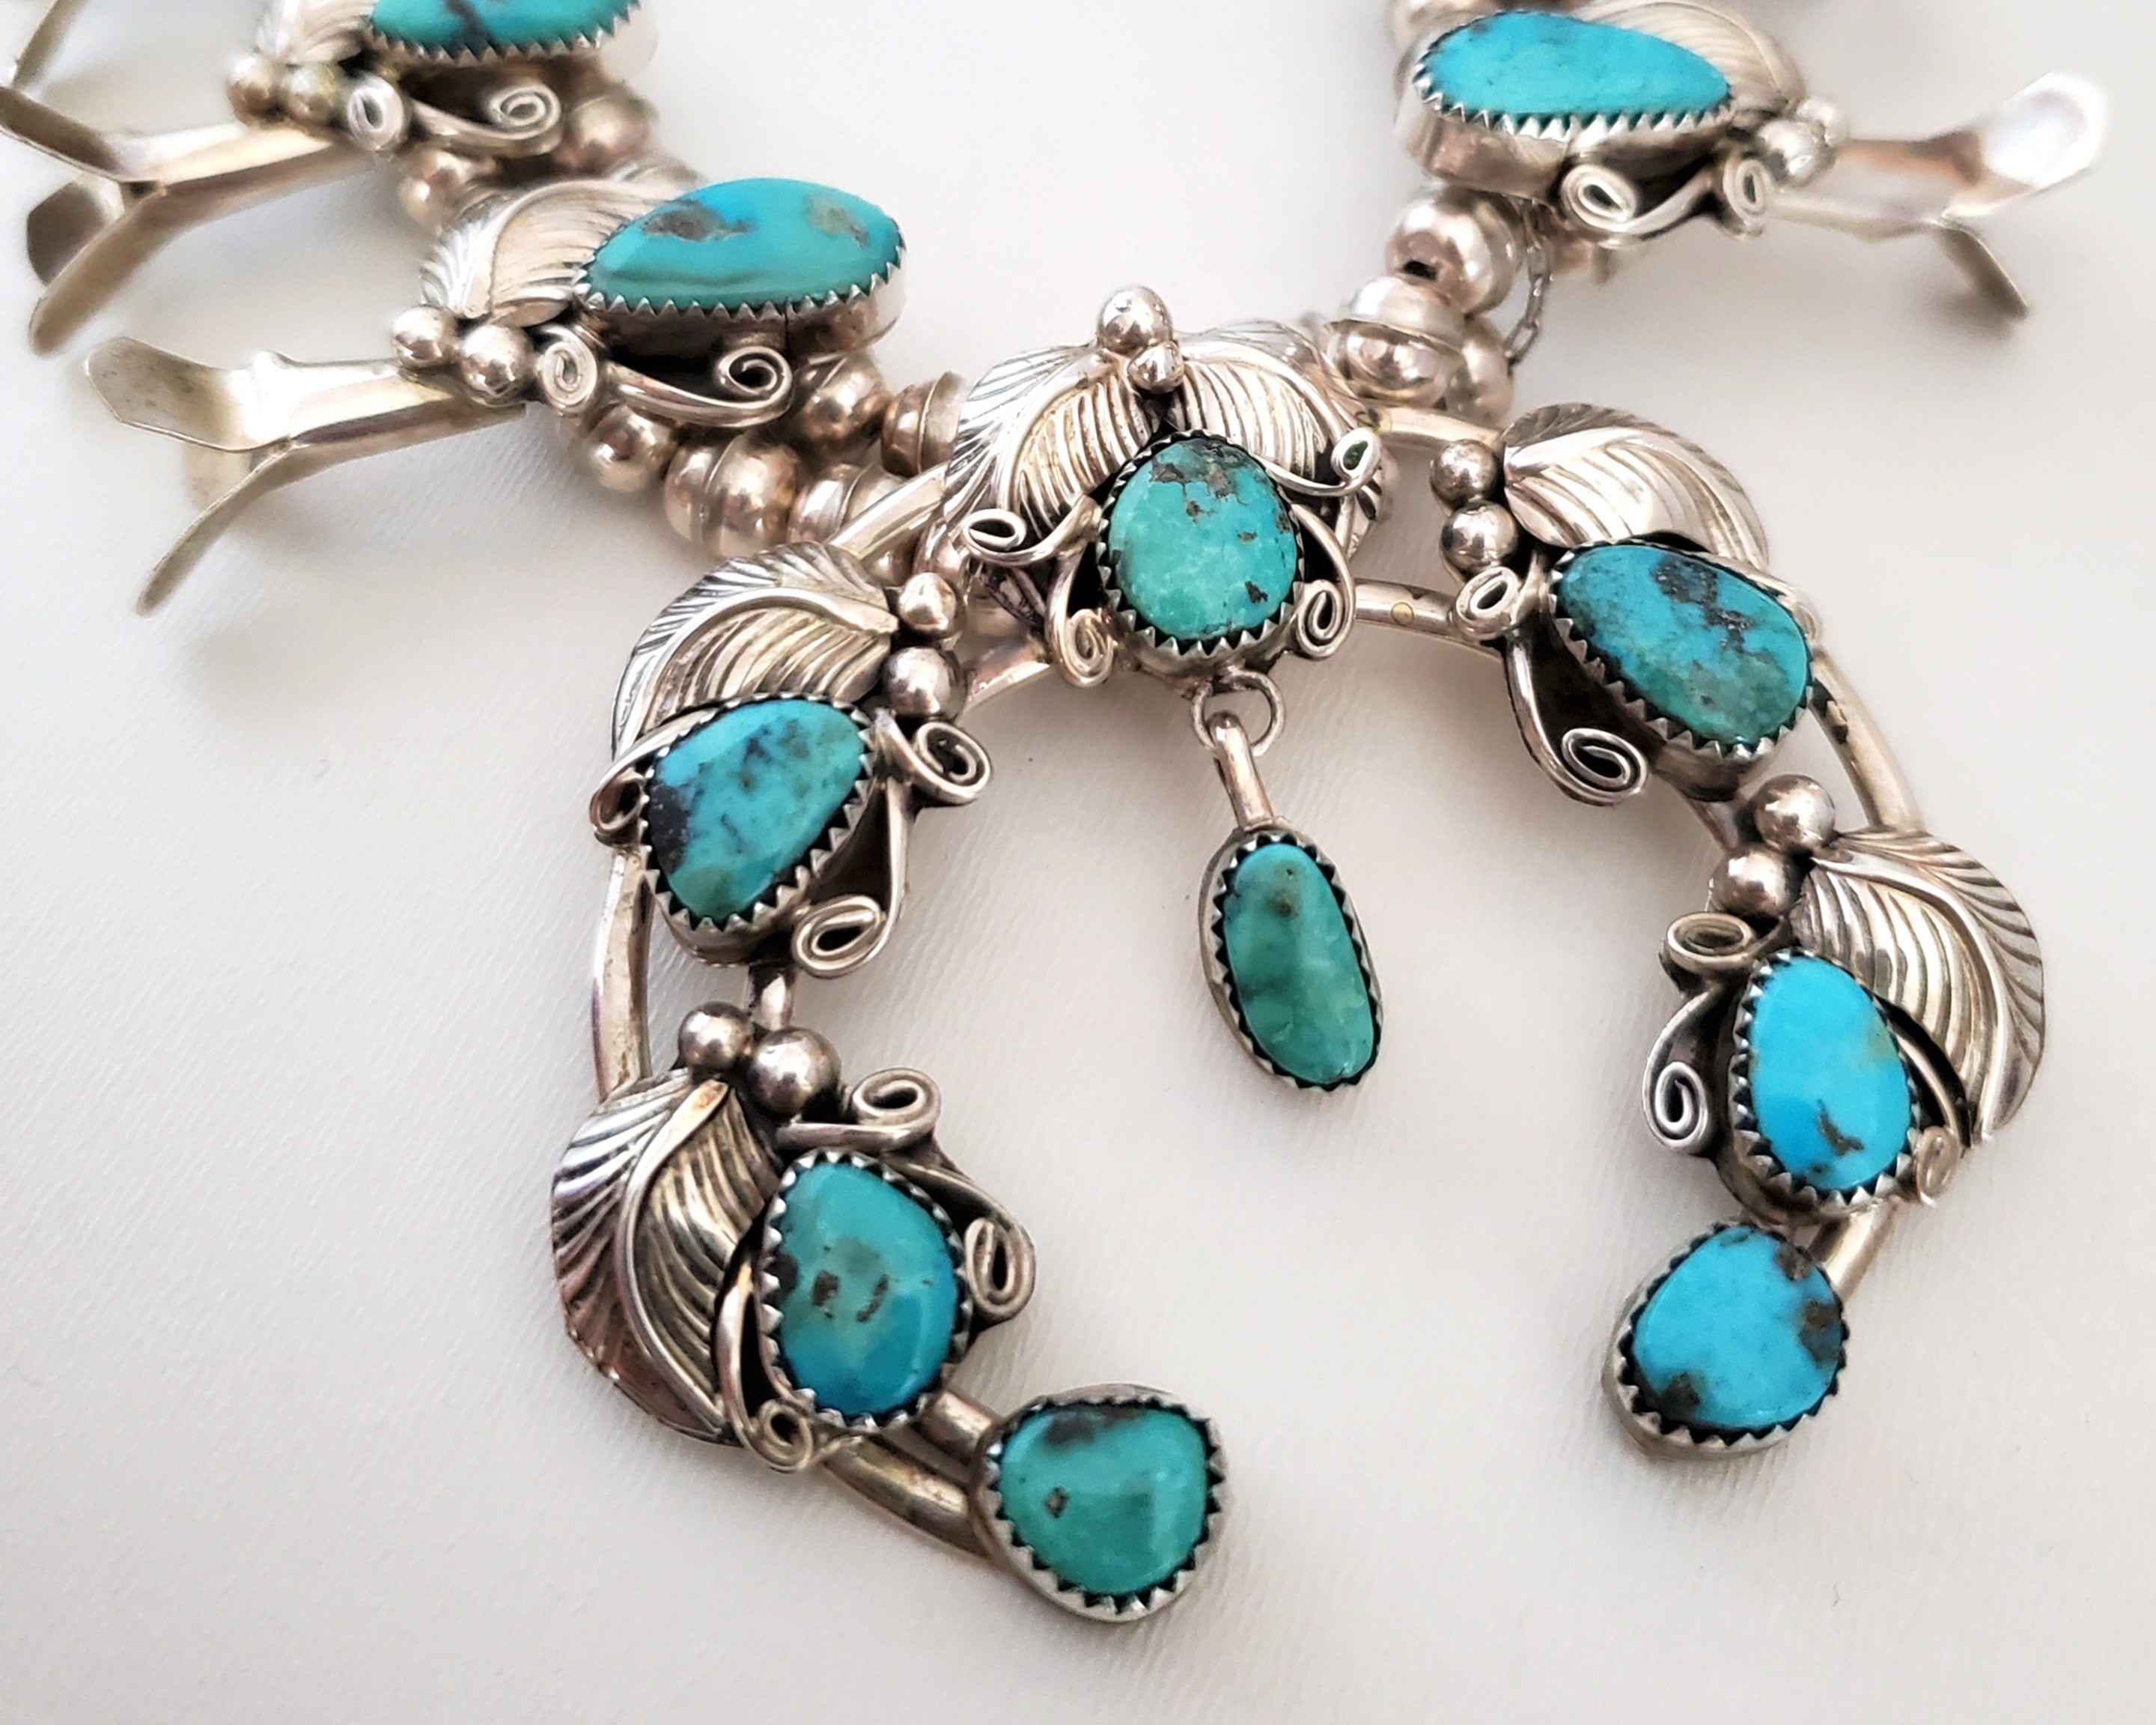 Reserved for I. - Second Payment - Native American Navajo Turquoise Squash Blossom Necklace